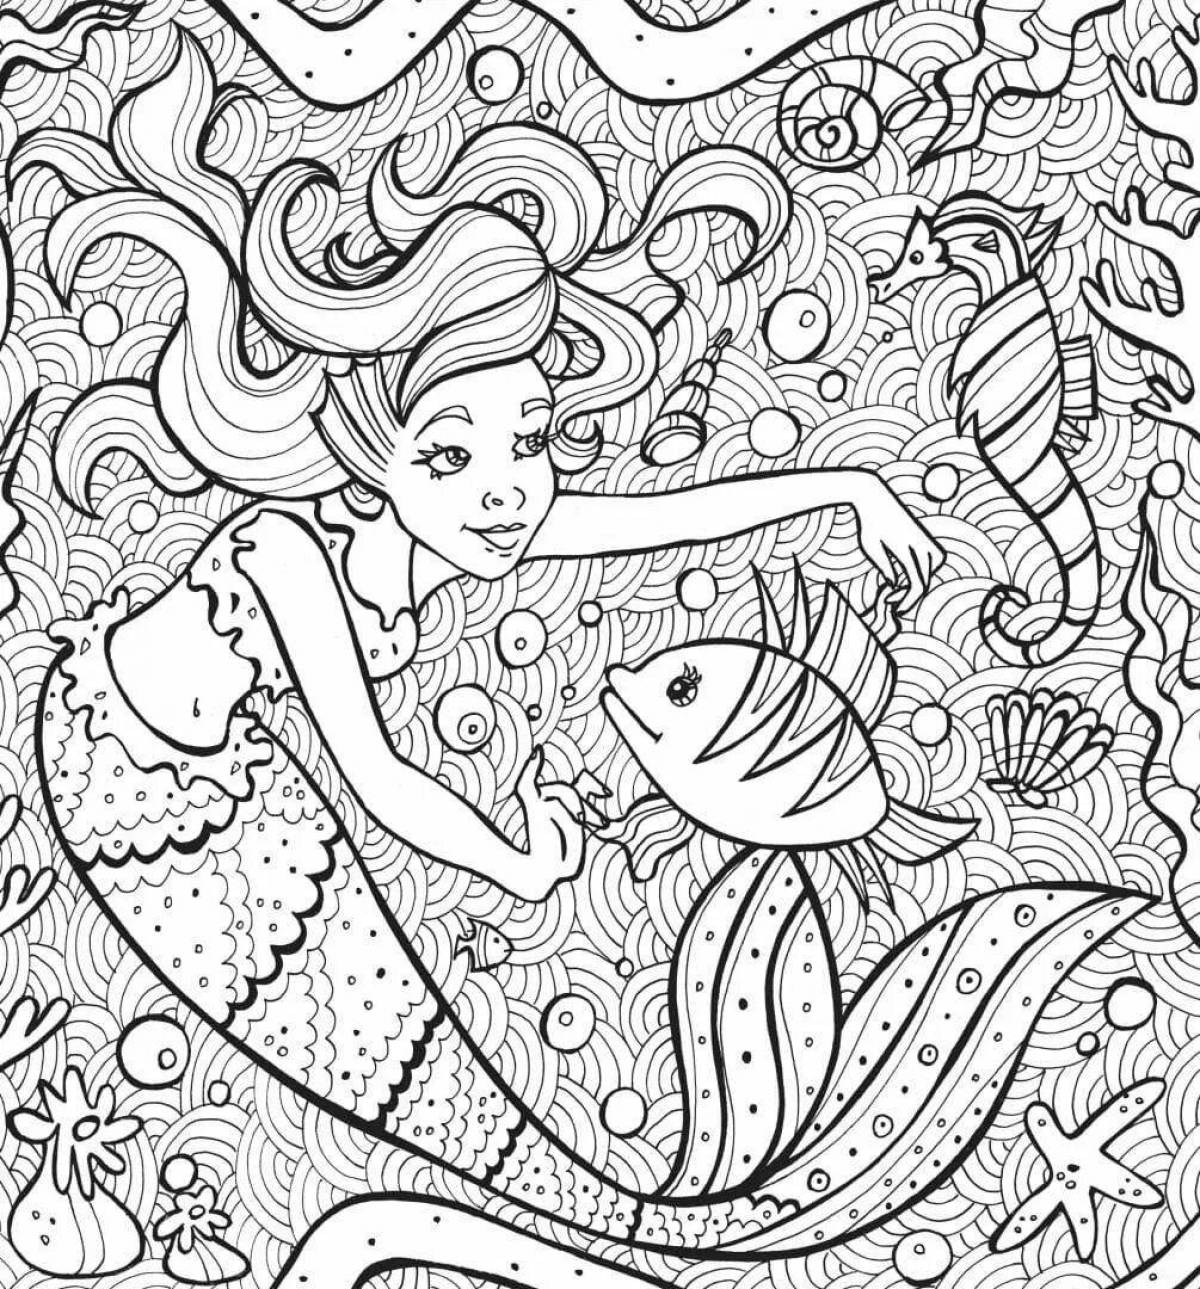 Amazing coloring book interesting for girls 8 years old